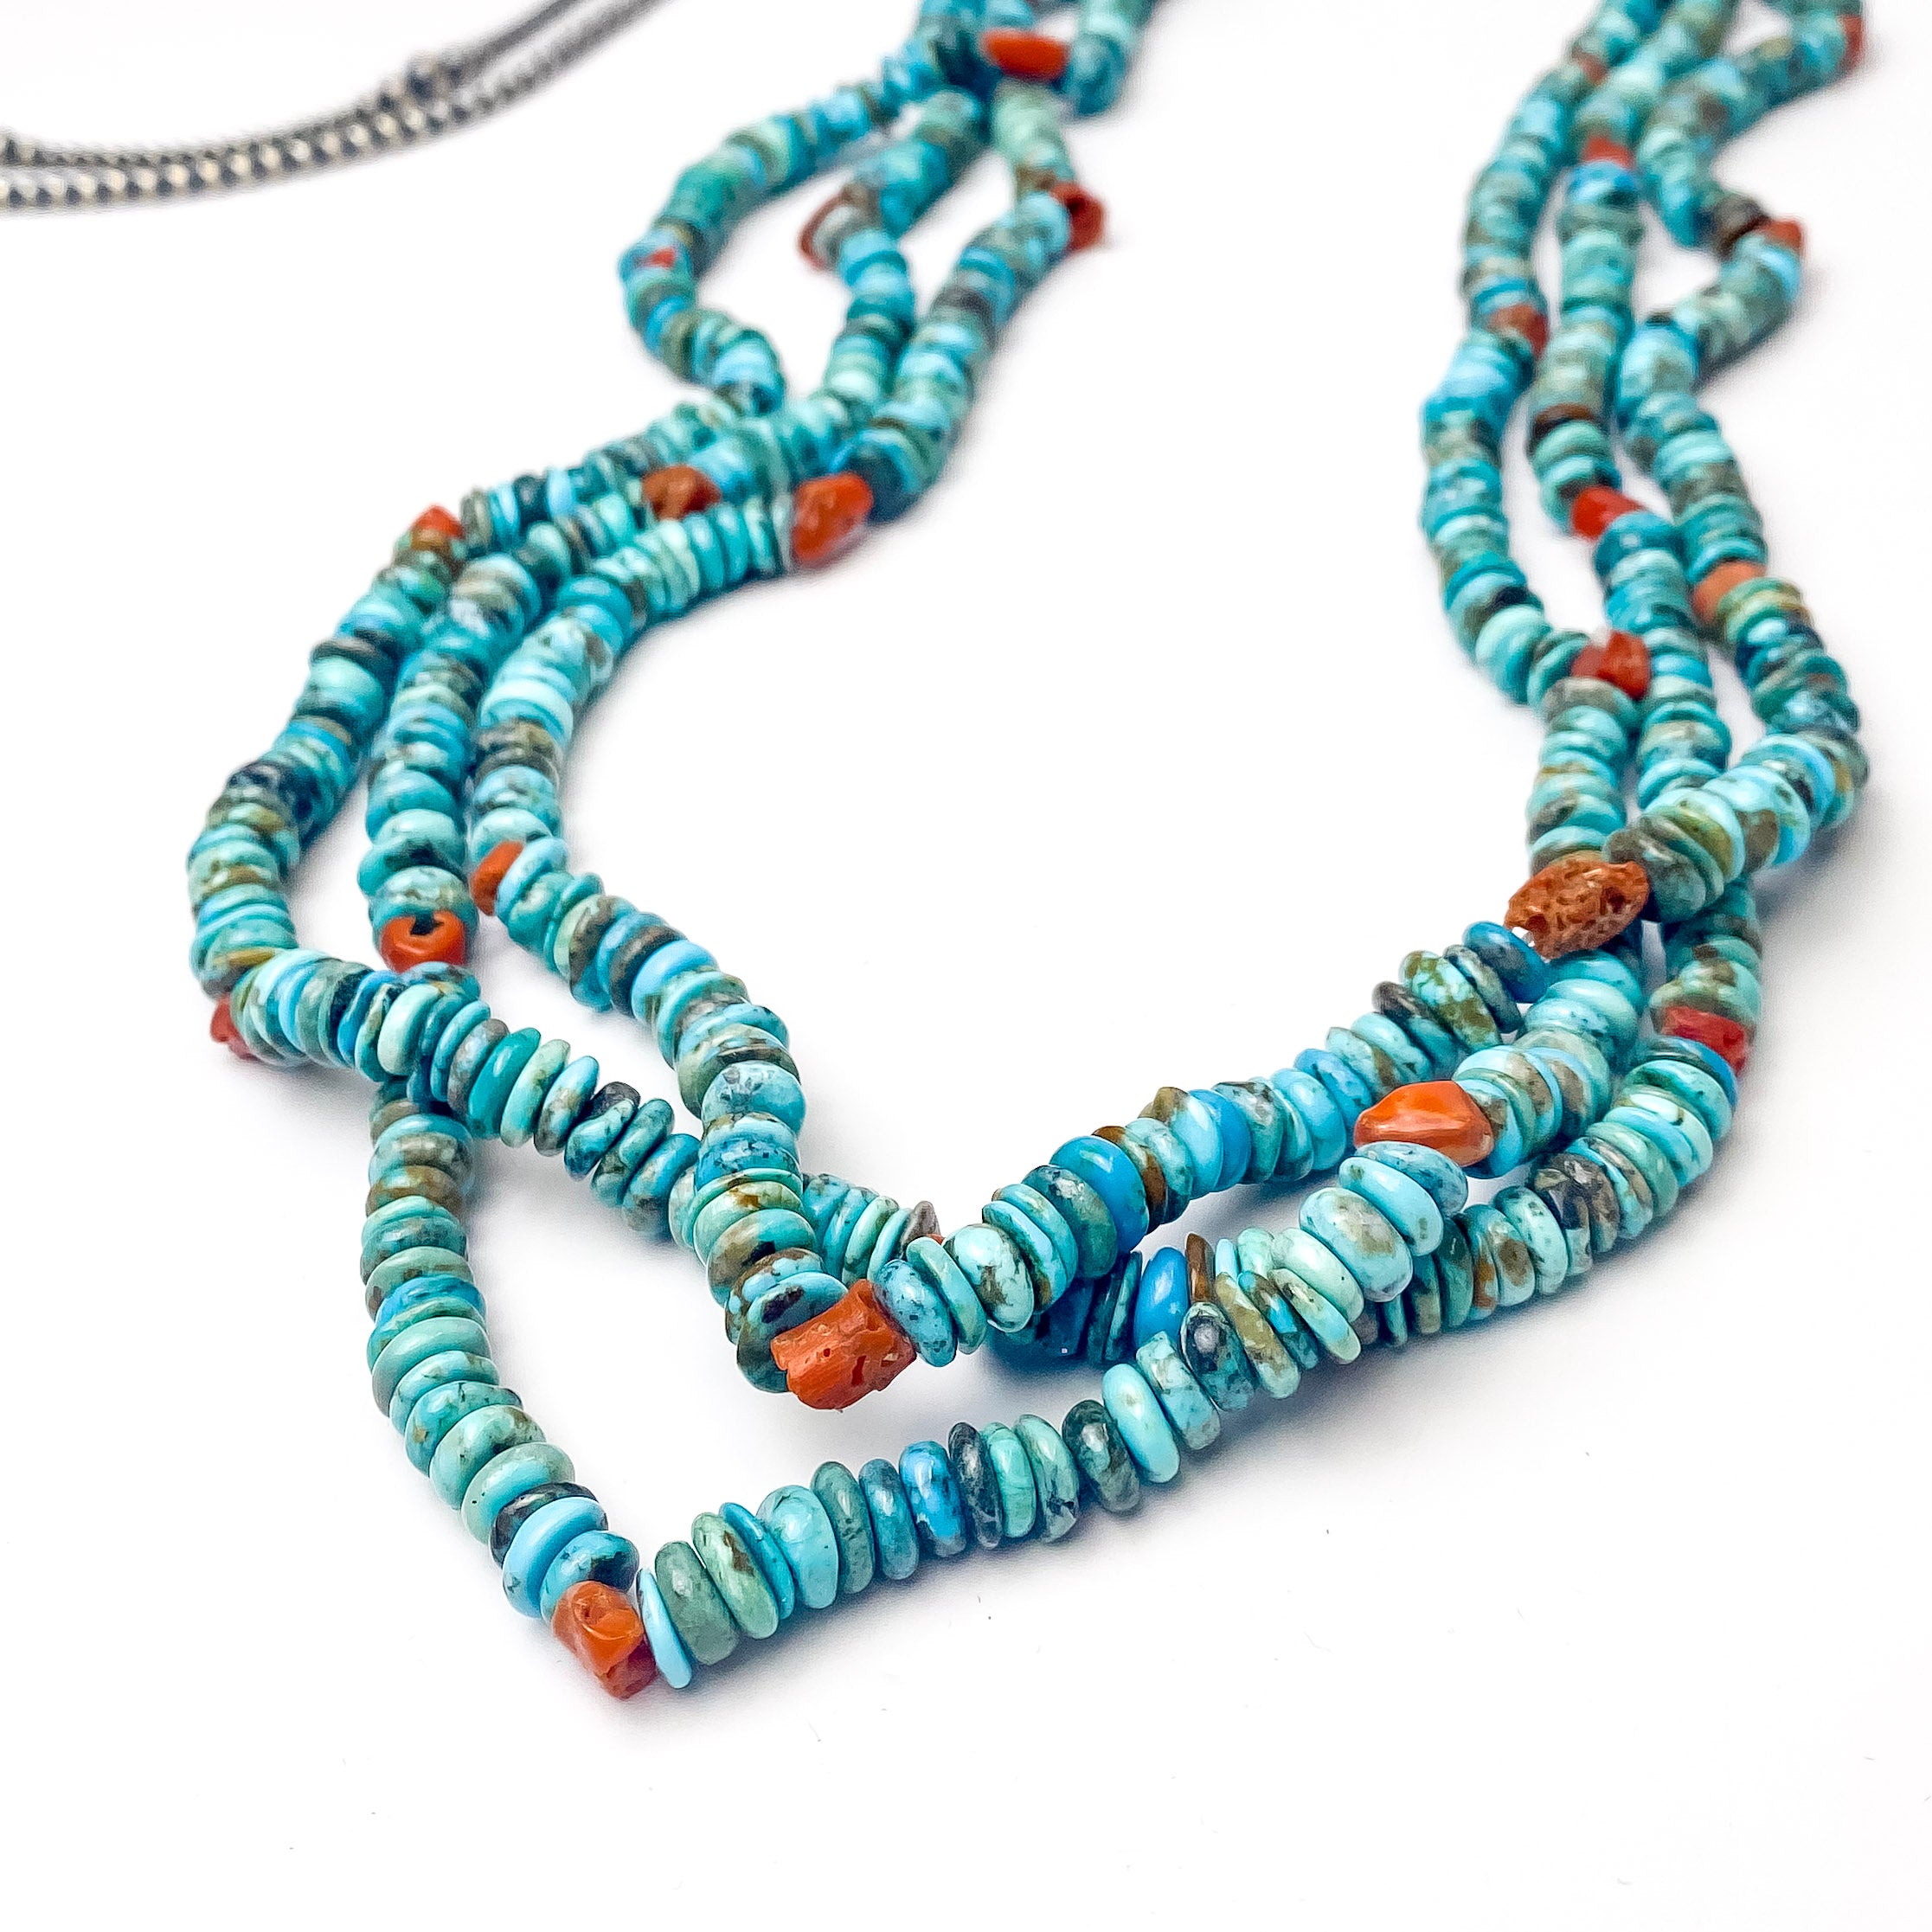 Navajo | Navajo Handmade Three Strand Necklace with Natural Turquoise and Coral Stones - Giddy Up Glamour Boutique